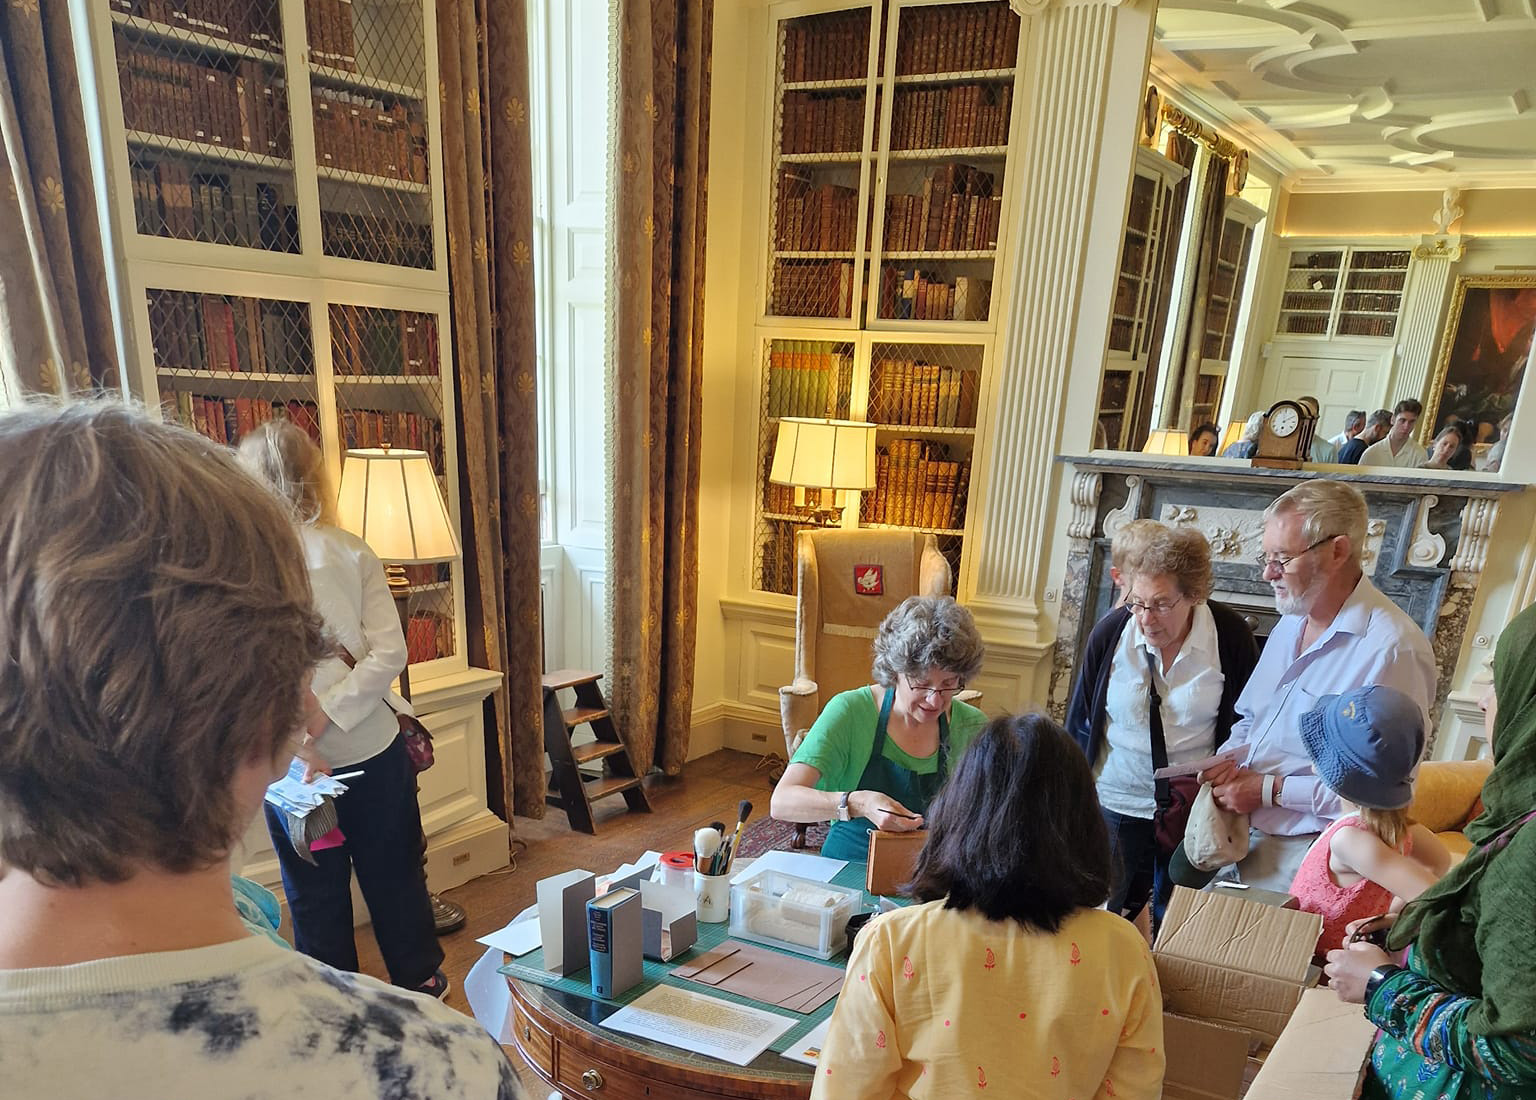 Small group of people of varying ages gathered round a small table covered with conservation equipment in the library of a historic house.